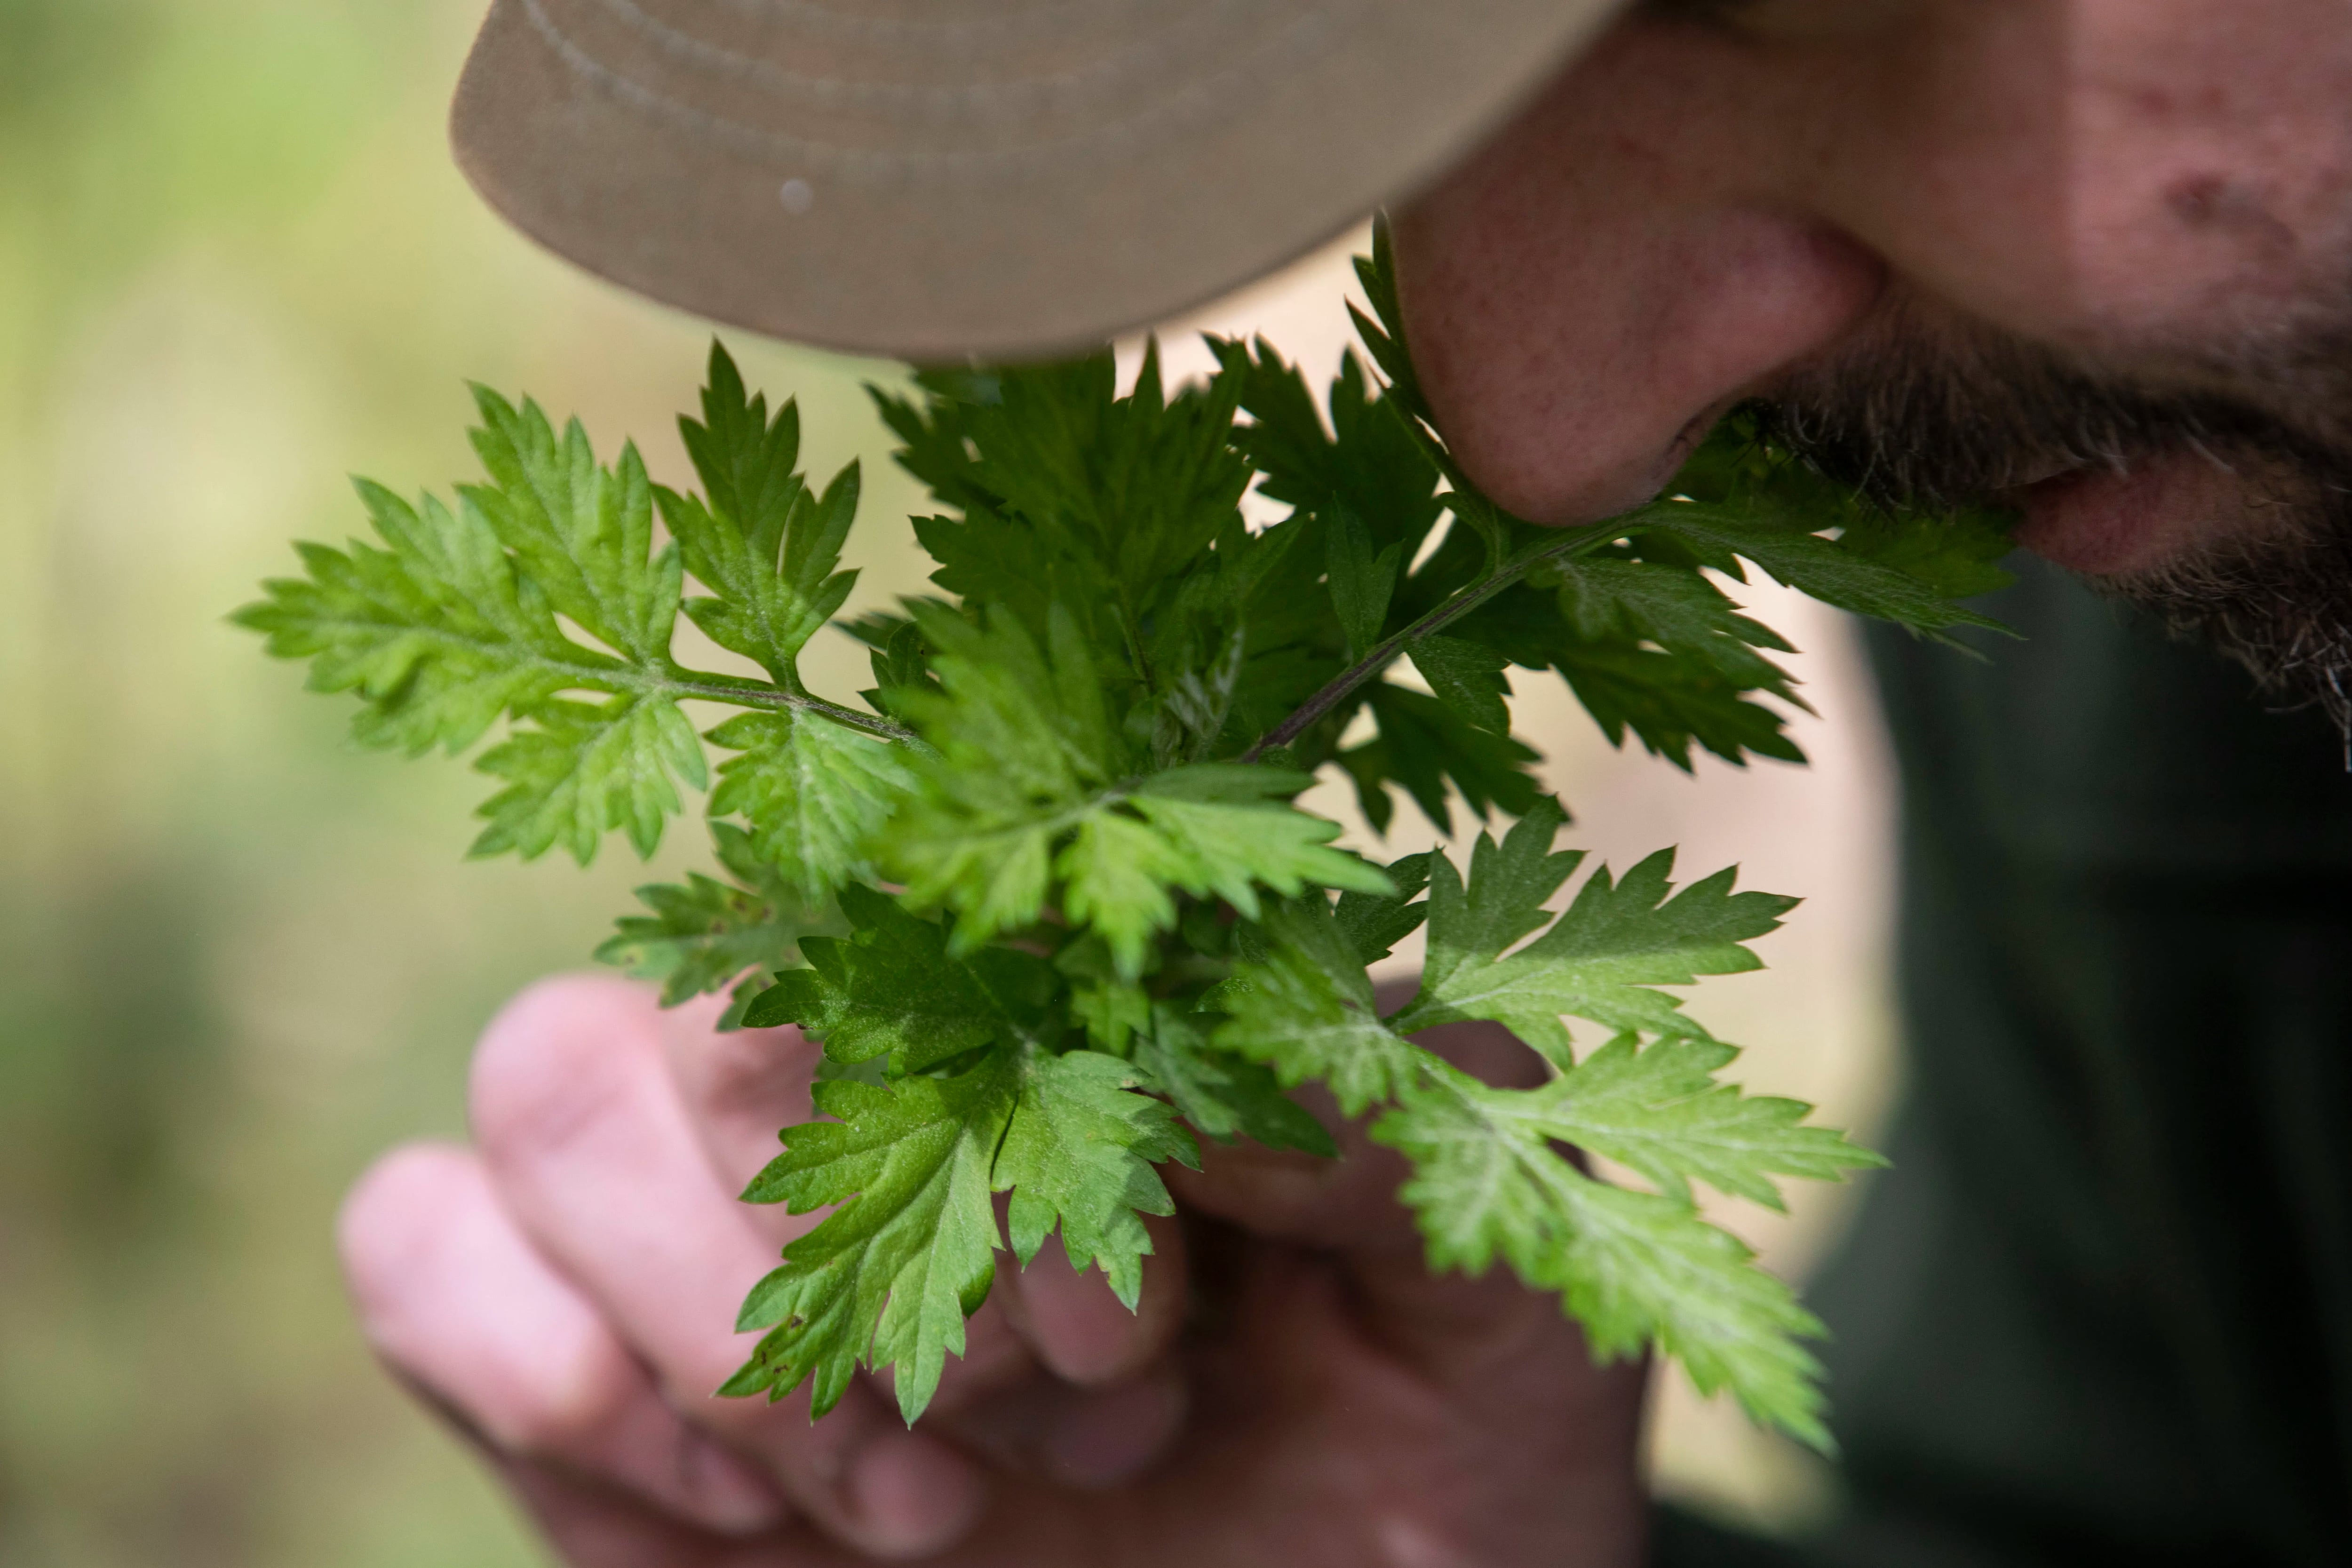 Phil Manganaro, chef and owner of Park Place, smells Mugwort at Black Run Preserve in Evesham Township, N.J. on Wednesday, May 20, 2020. According to Manganaro, the flavor of Mugwort is a cross between mint and oregano with a little bit of fennel.